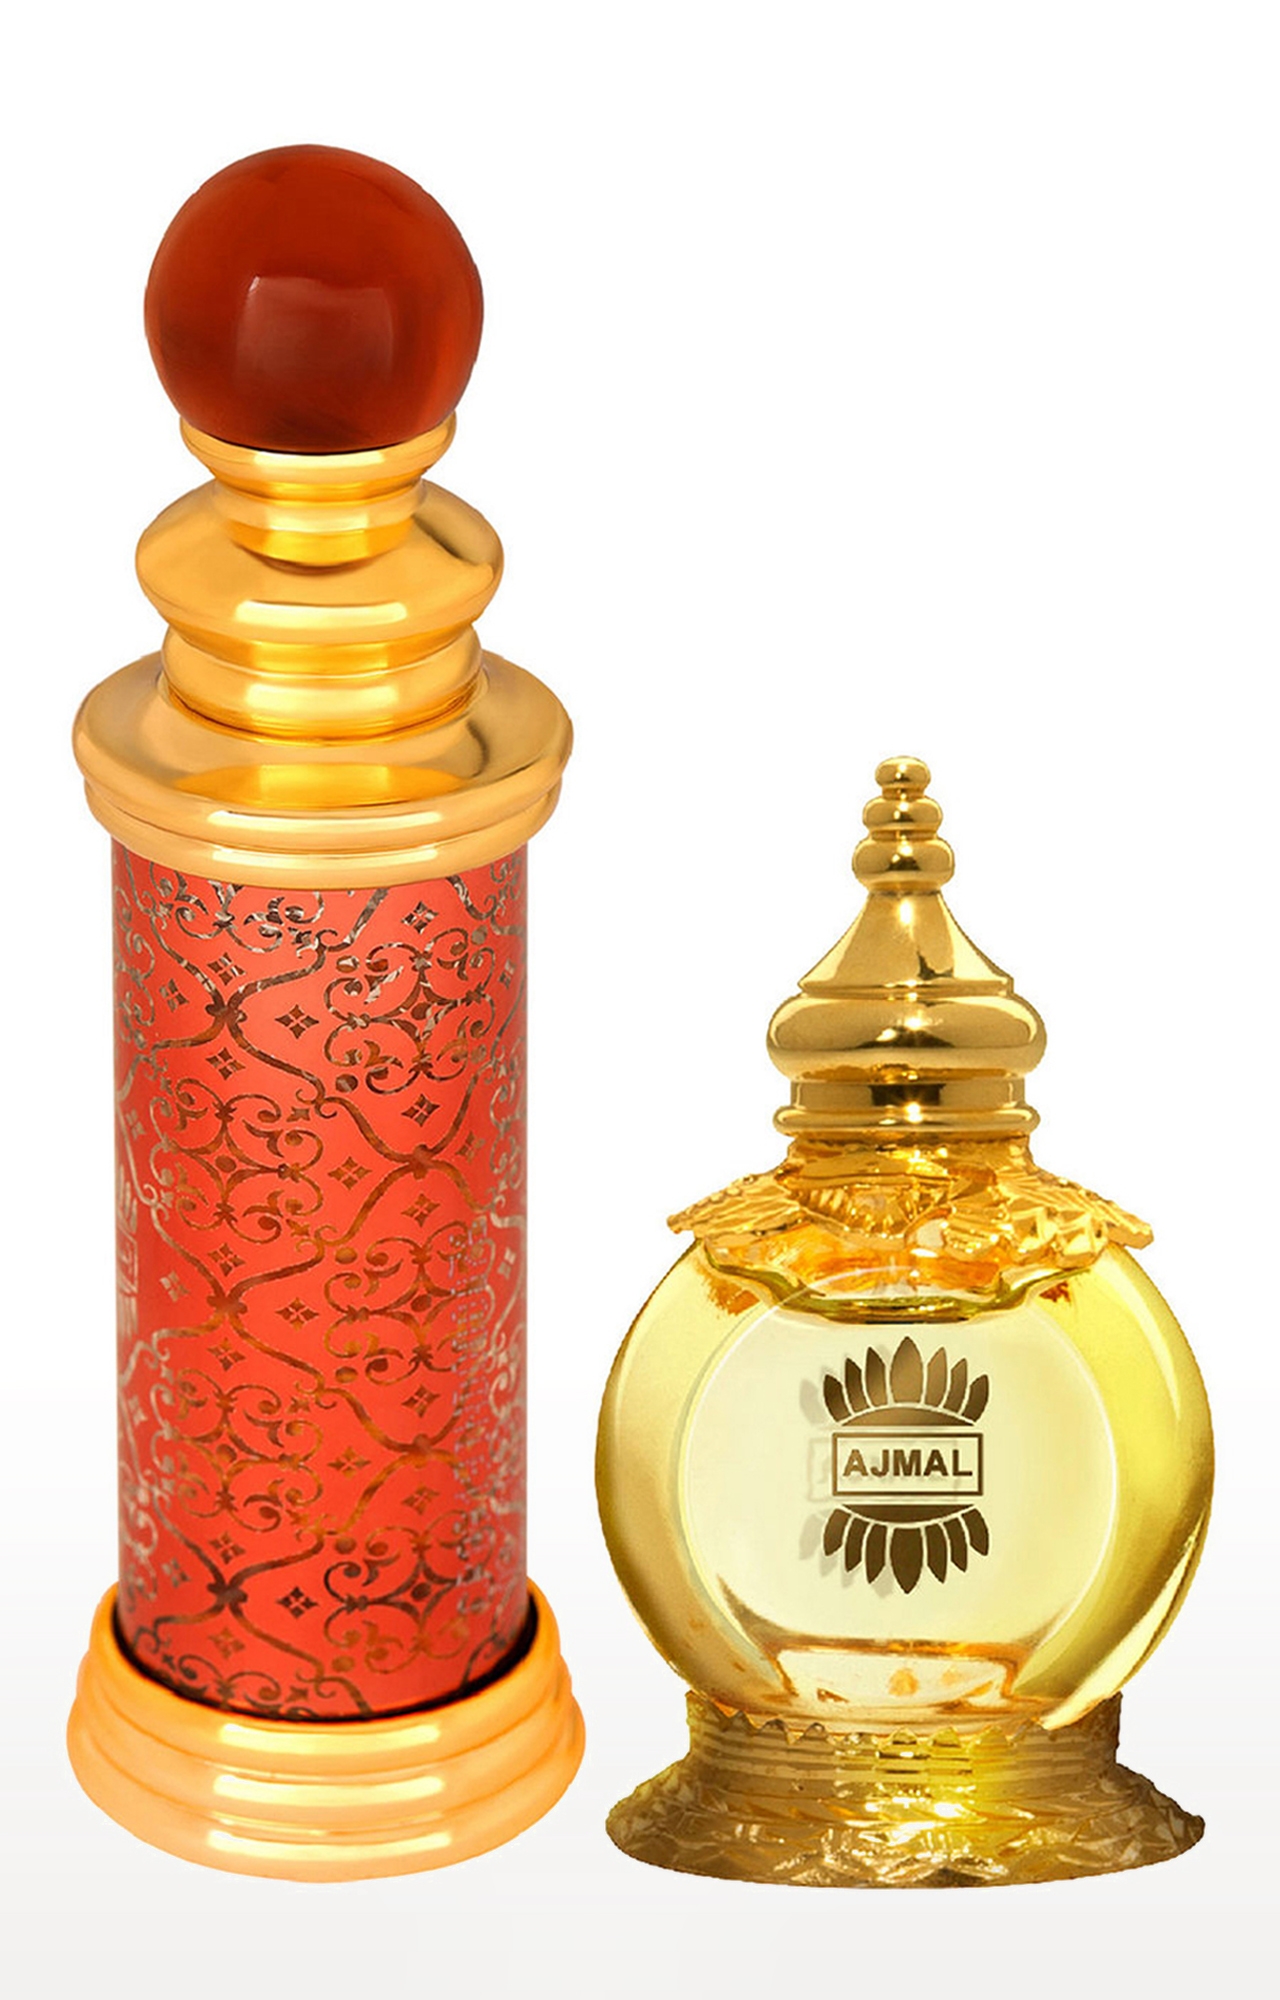 Ajmal Classic Oud Concentrated Perfume Oil Oudh Alcohol-free Attar 10ml for Unisex and Mukhallat AL Wafa Concentrated Perfume Oil Oriental Musky Alcohol-free Attar 12ml for Unisex